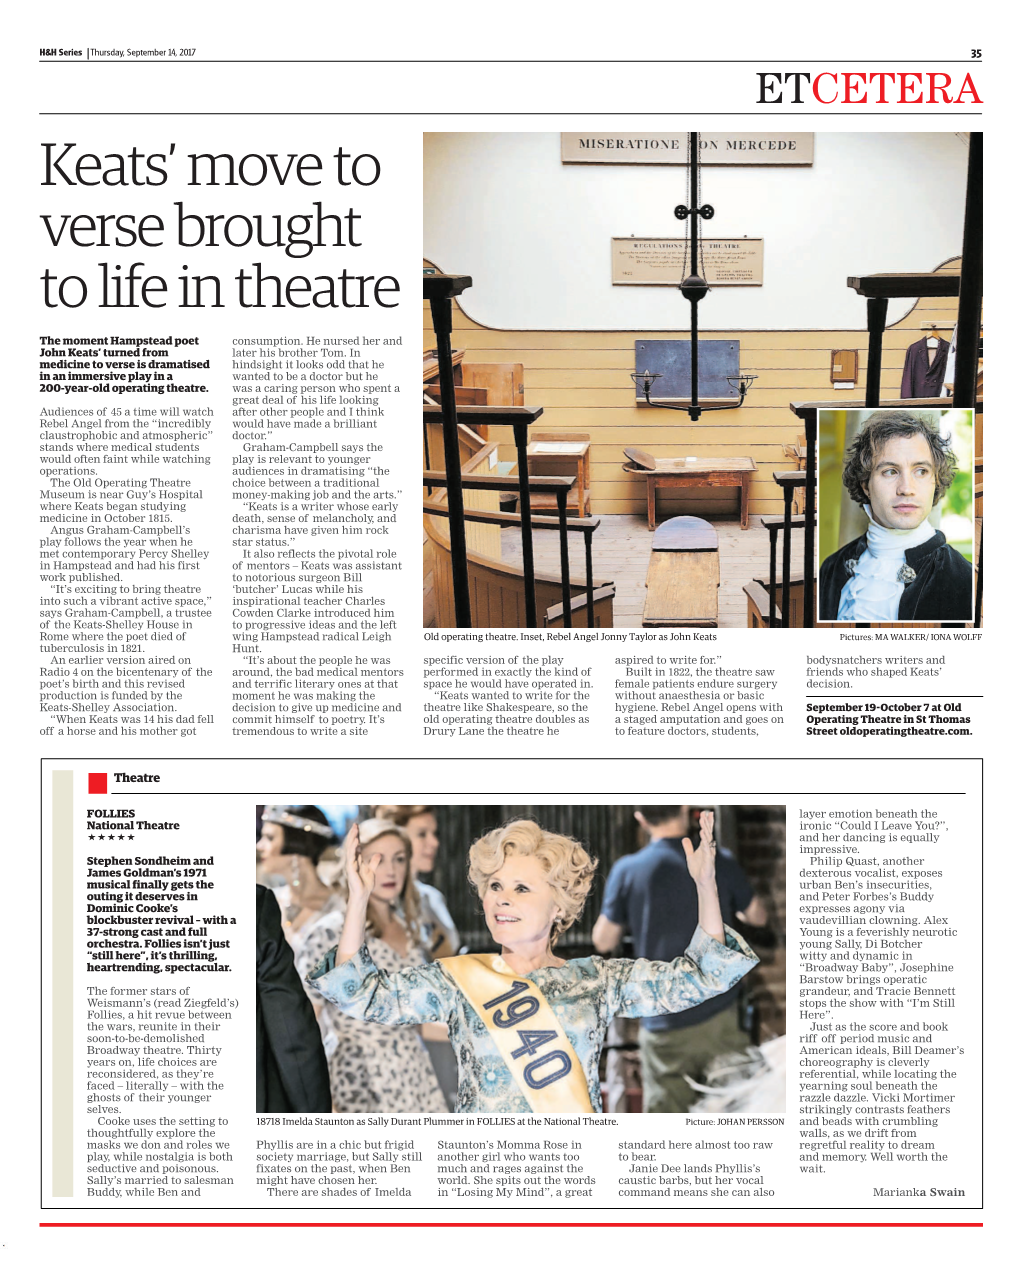 Keats' Move to Verse Brought to Life in Theatre